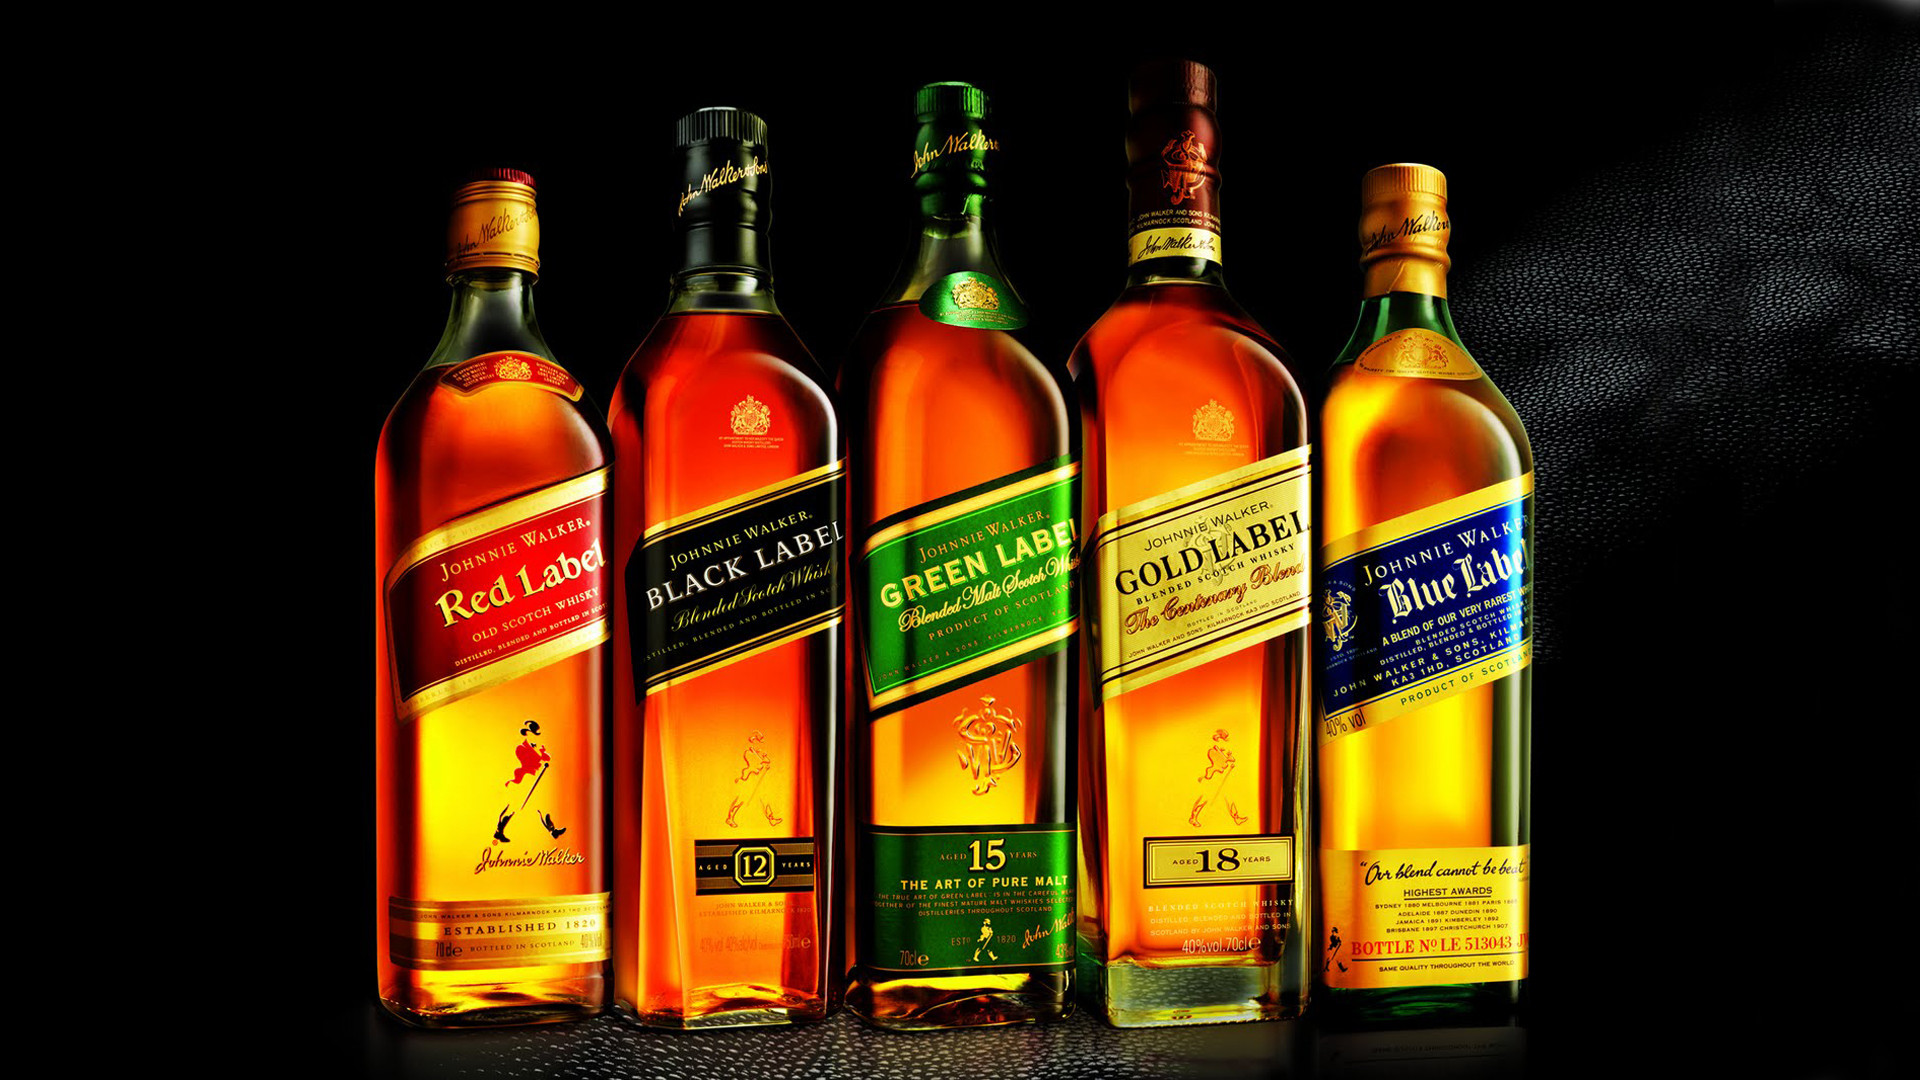 Johnnie Walker is the most widely distributed blended Scotch Whisky in the world. Explore the different Johnnie Walker labels and enjoy the experience